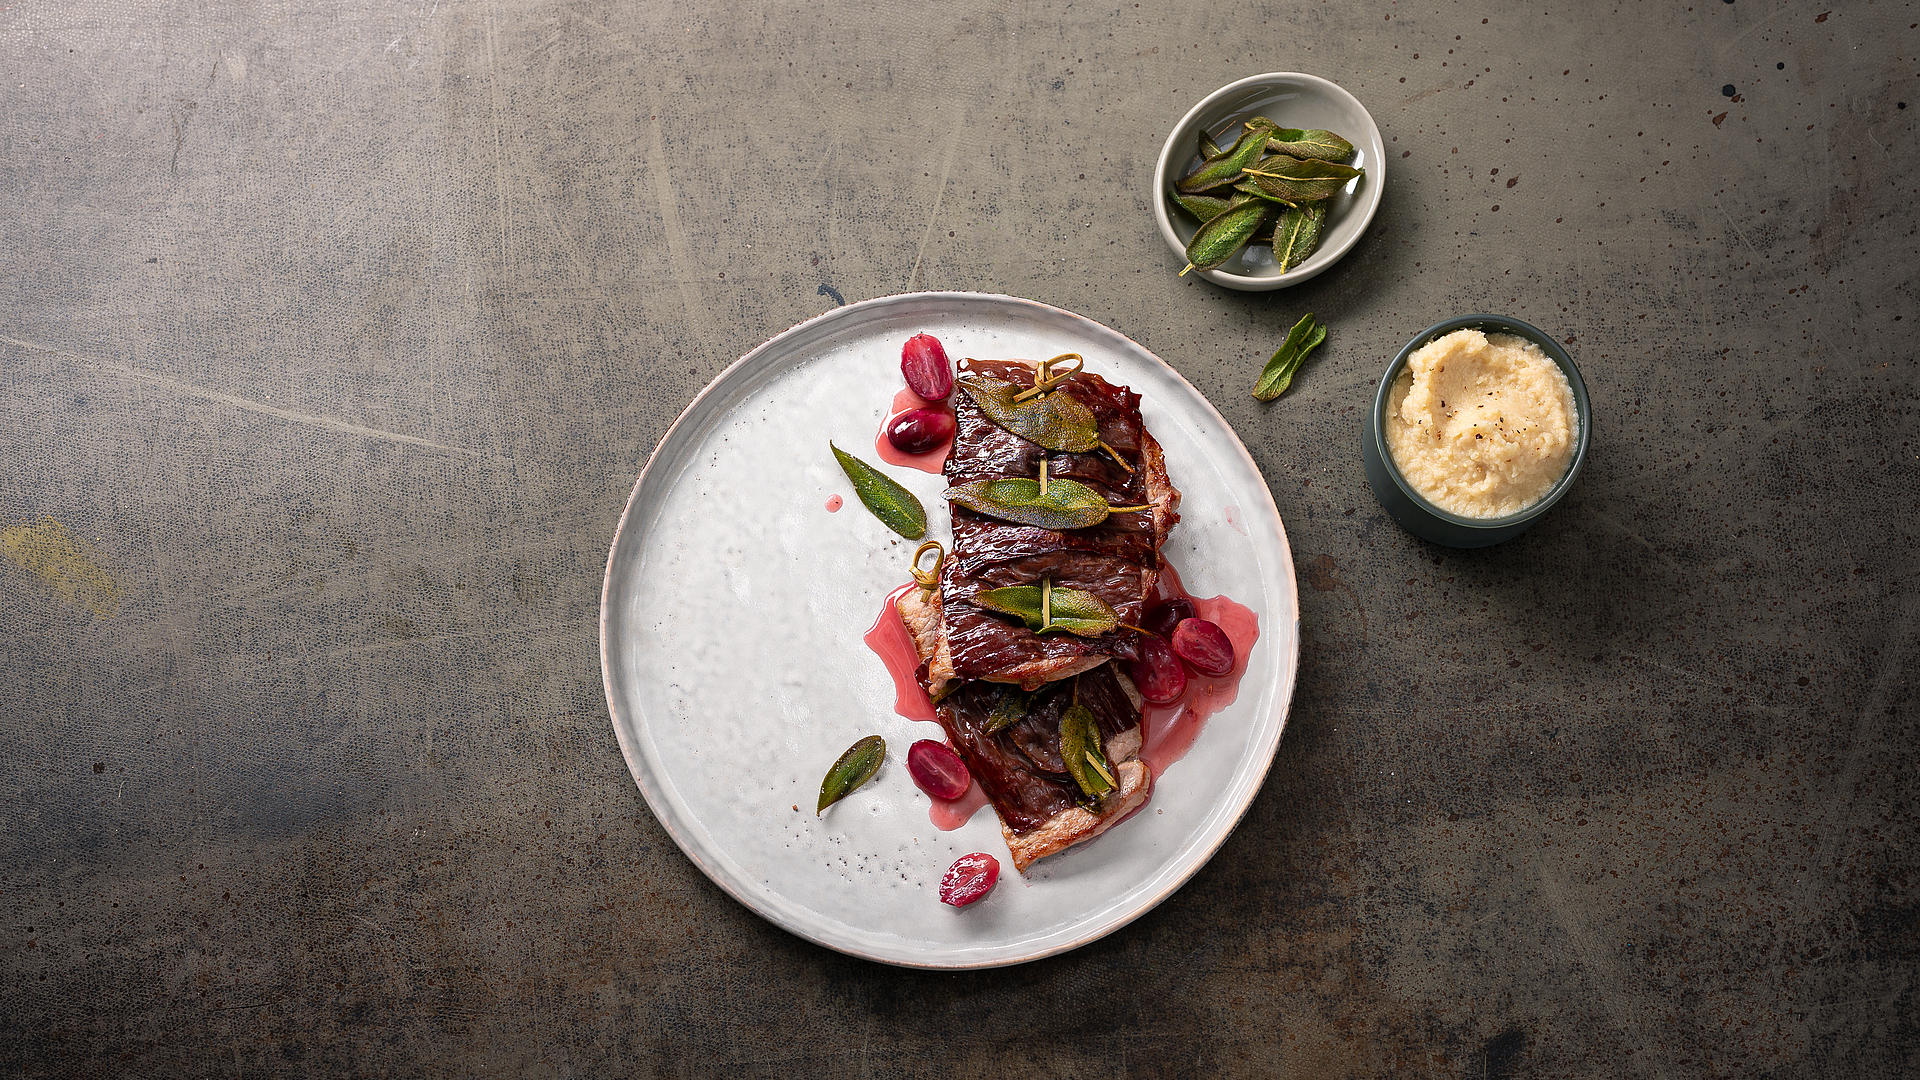 Saltimbocca with melted grapes, celeriac mash and crispy sage